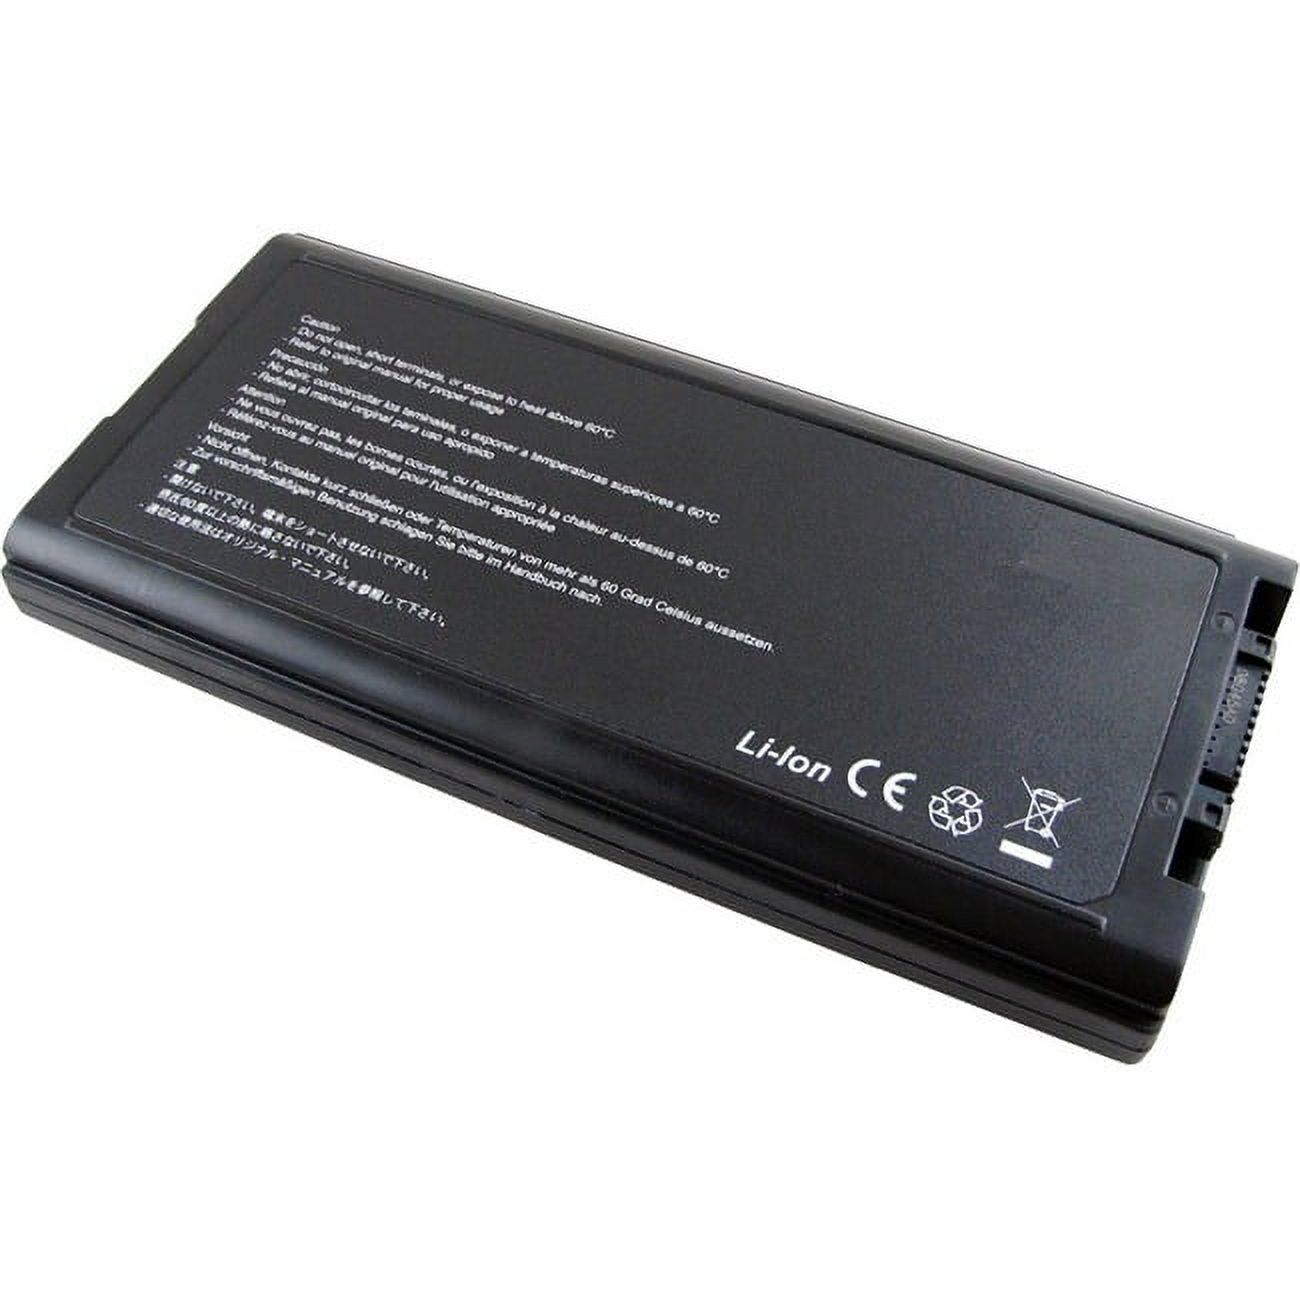 V7 Replacement Battery FOR PANASONIC CF-52 OEM# CF-VZSU29ASU CFVZSU29AS 9 CELL - image 2 of 2